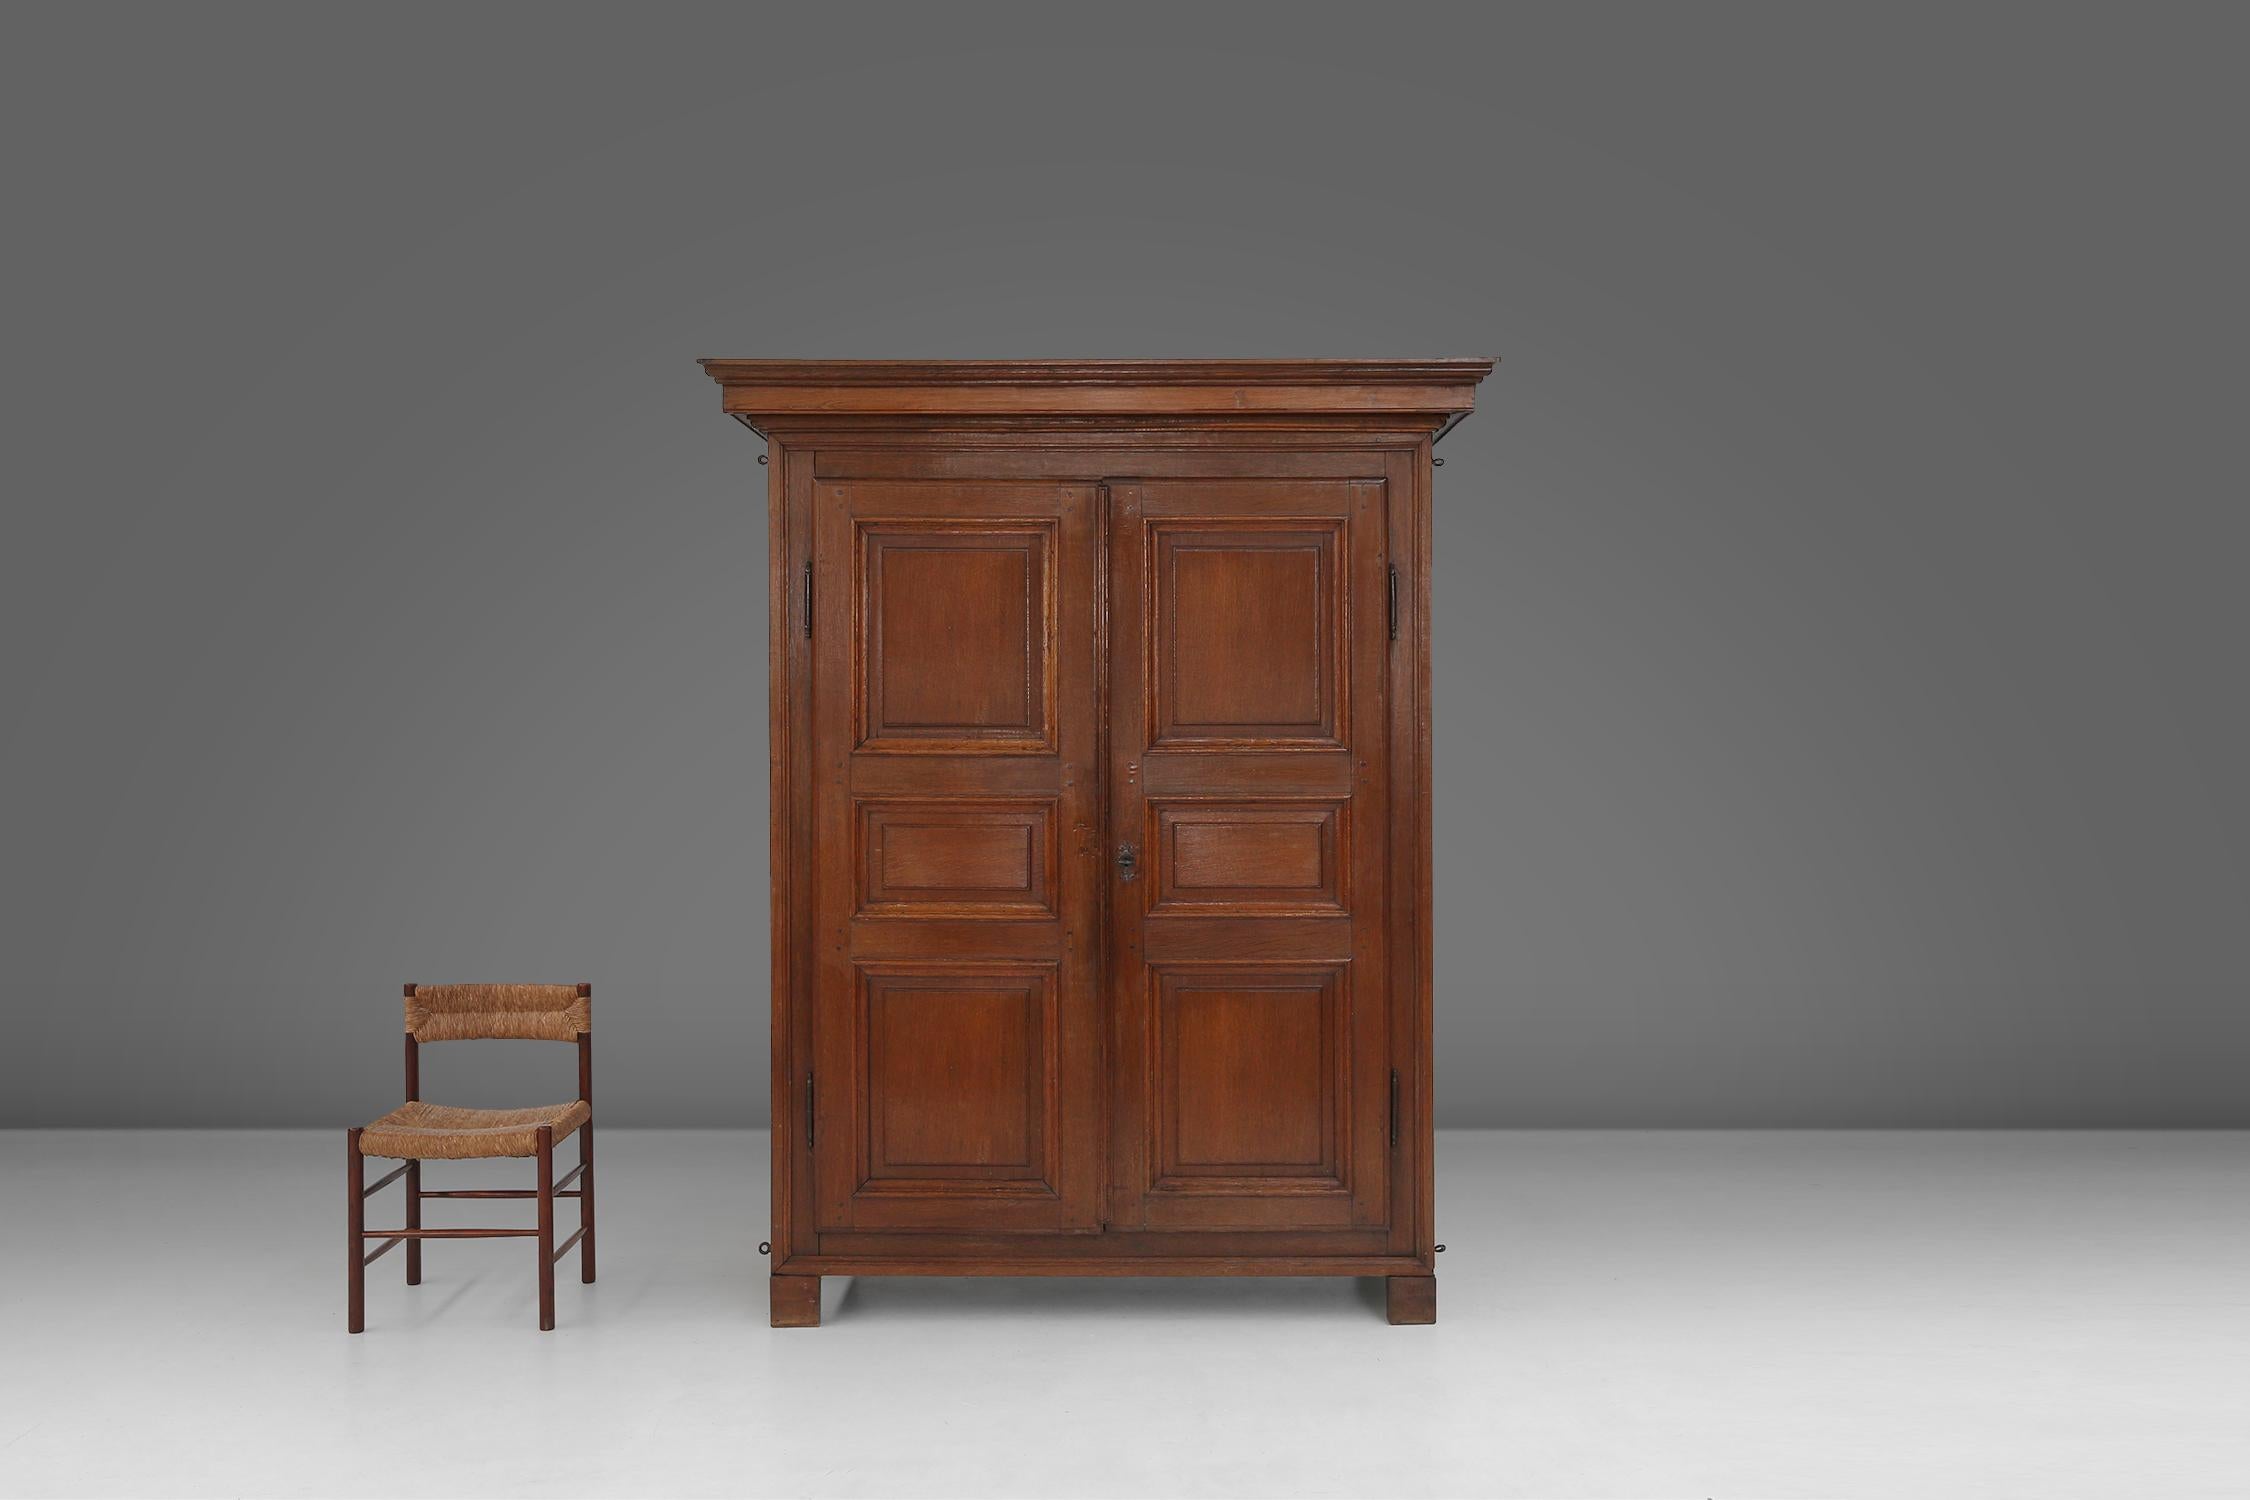 This 18th century wardrobe made of full oak and beautiful example of craftsmanship and tradition. It is assembled using an old technique with screws visible on the outside of the wardrobe. This gives the wardrobe added charm and character.

The